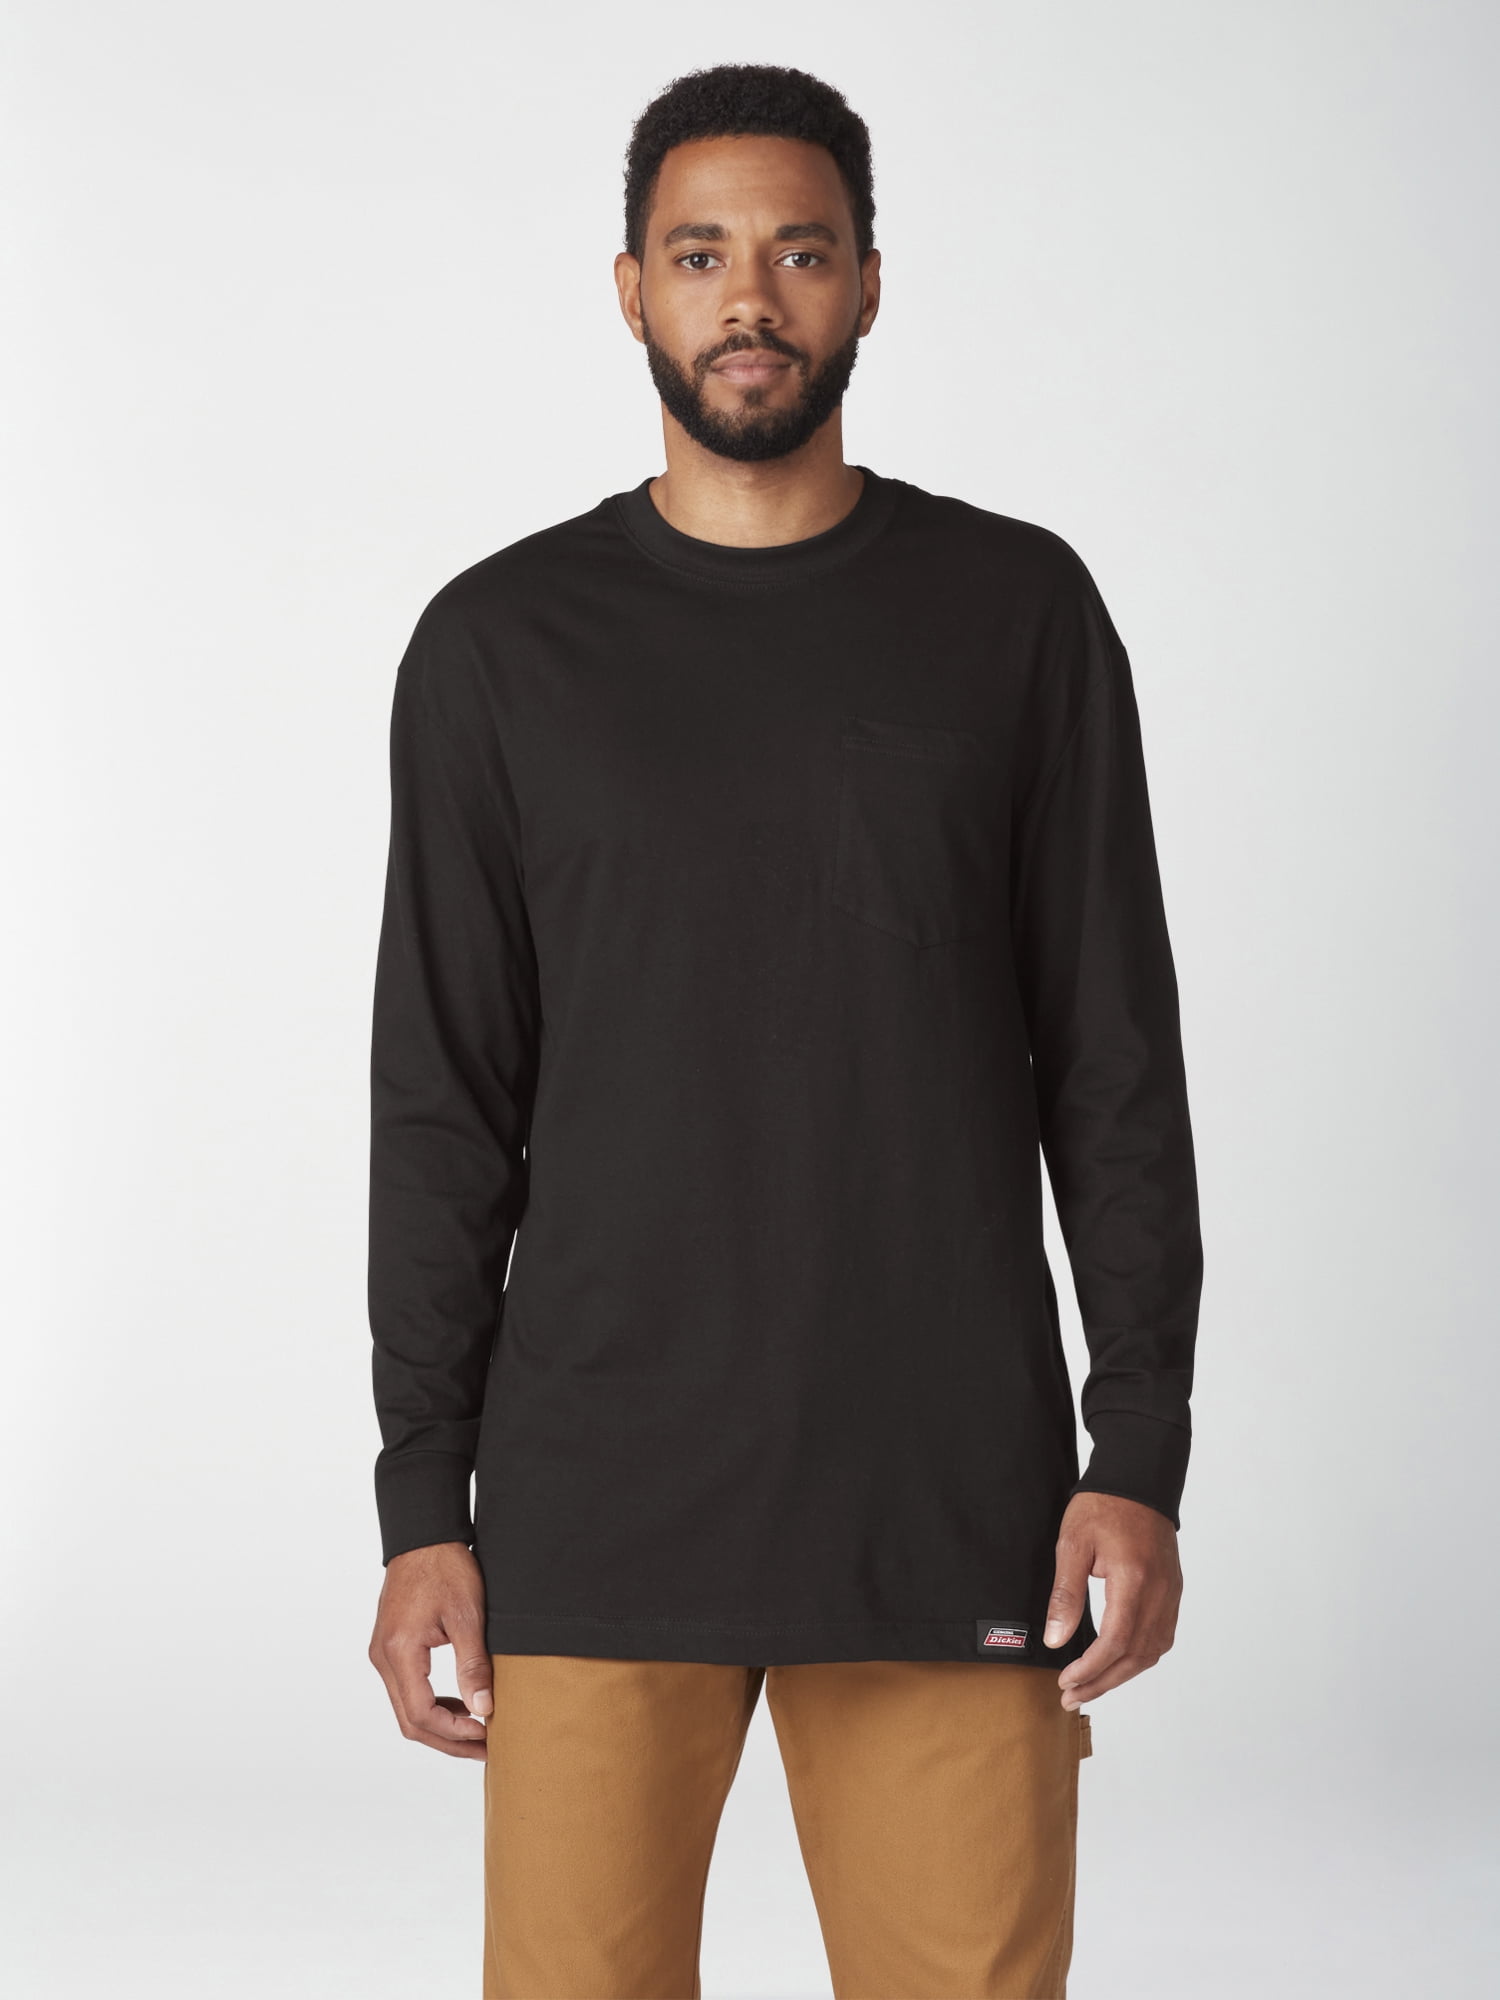 Genuine Sleeve Pullover Crew Neck Relaxed Fit T-Shirt (Men's) Walmart.com